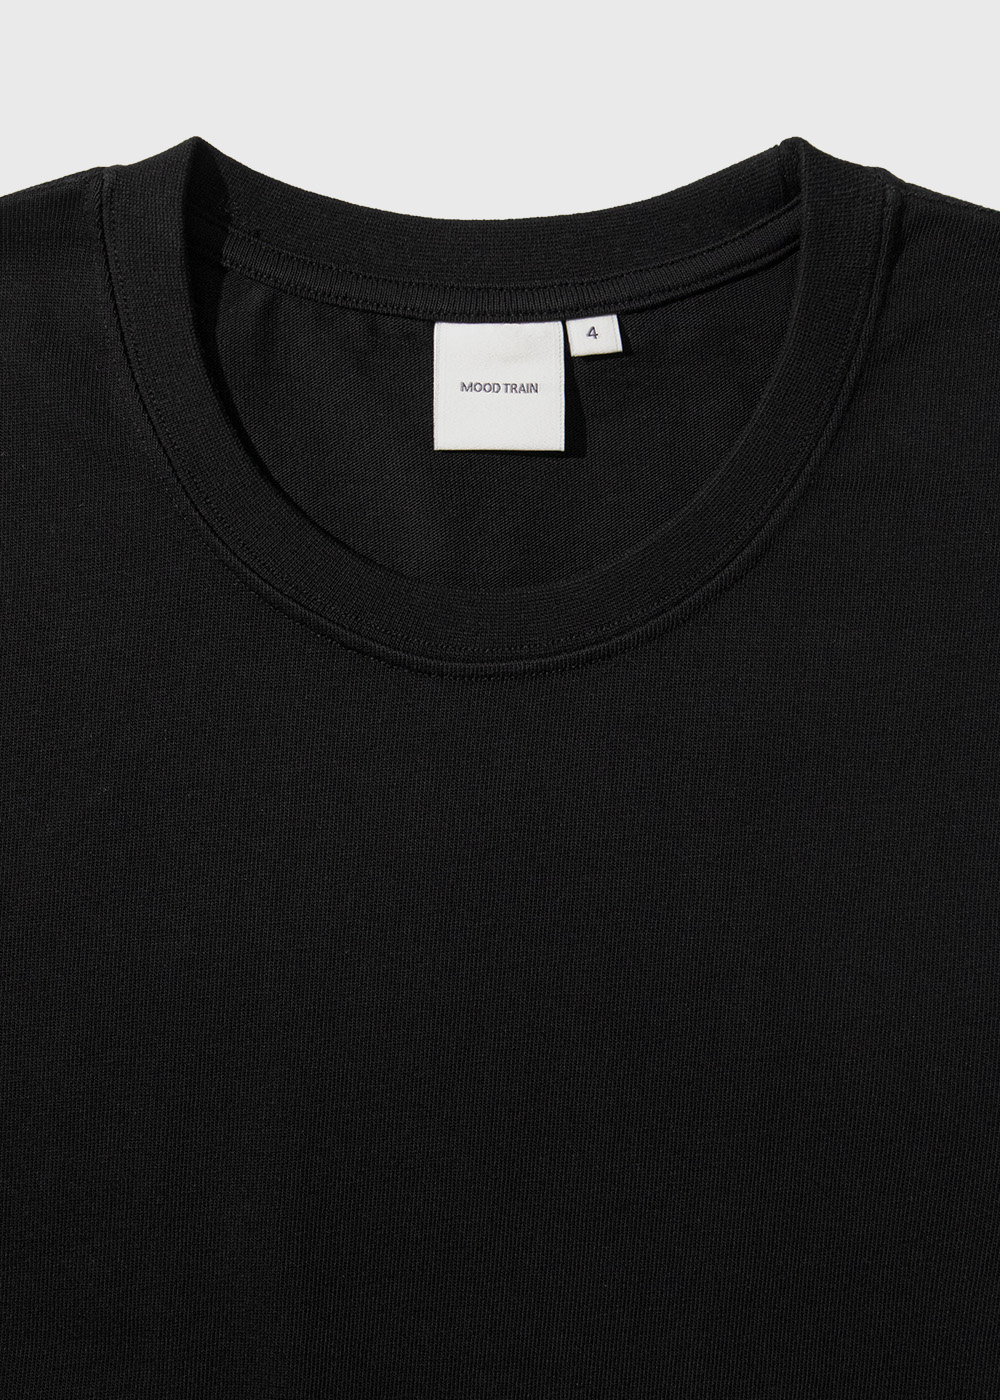 E. Enzymed Combed Cotton 100% 20/2 Single T-shirt _ black